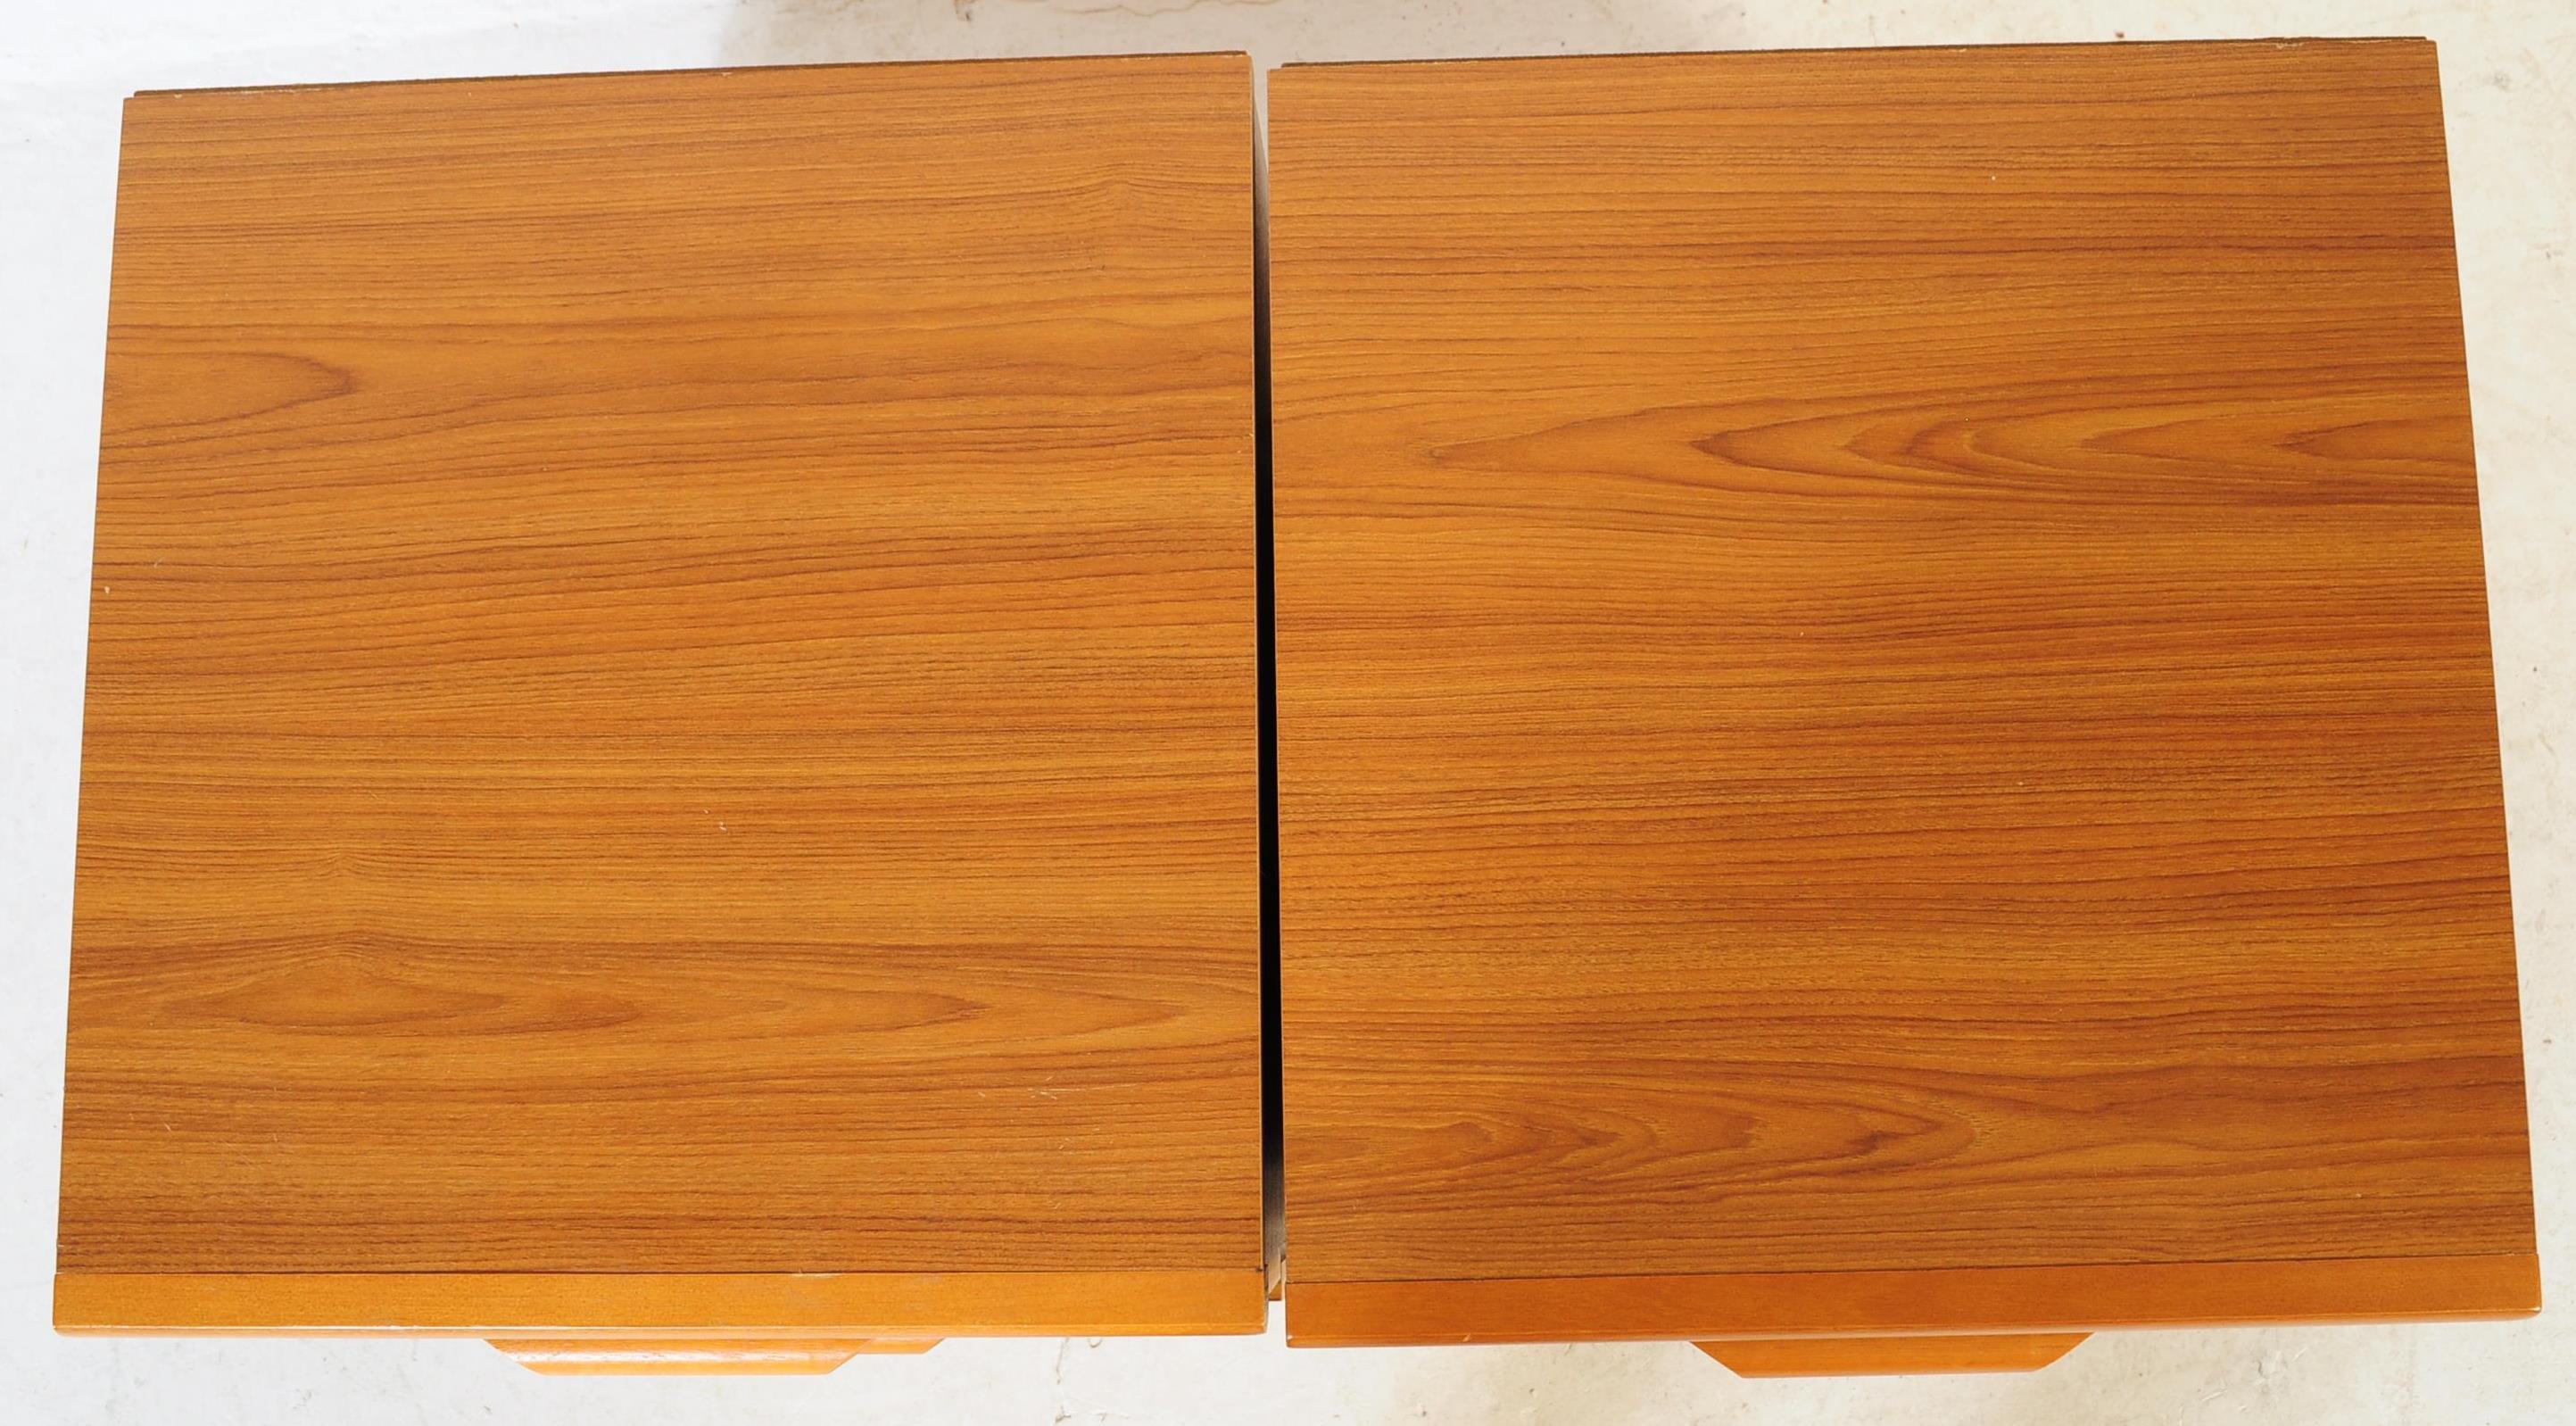 PAIR OF MID CENTURY TEAK BEDSIDE CABINETS - Image 4 of 5